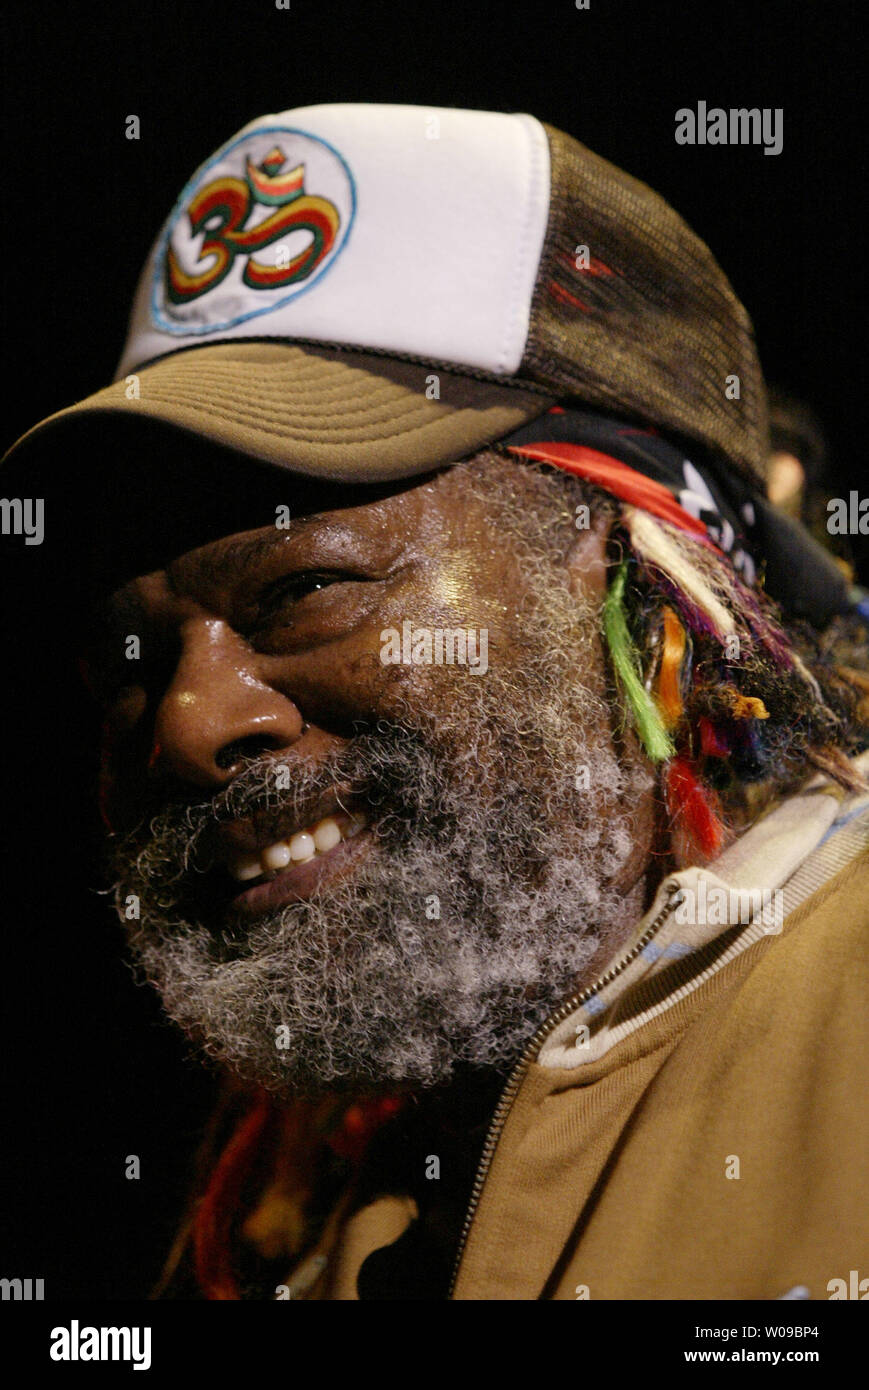 Singer George Clinton, shown here during a performance with Parliament/Funkadelic on the first day of the Beale Street Music Festival on Friday, April 30, 2004 at Tom Lee Park in Memphis, Tenn. (UPI Photo/Billy Suratt) Stock Photo